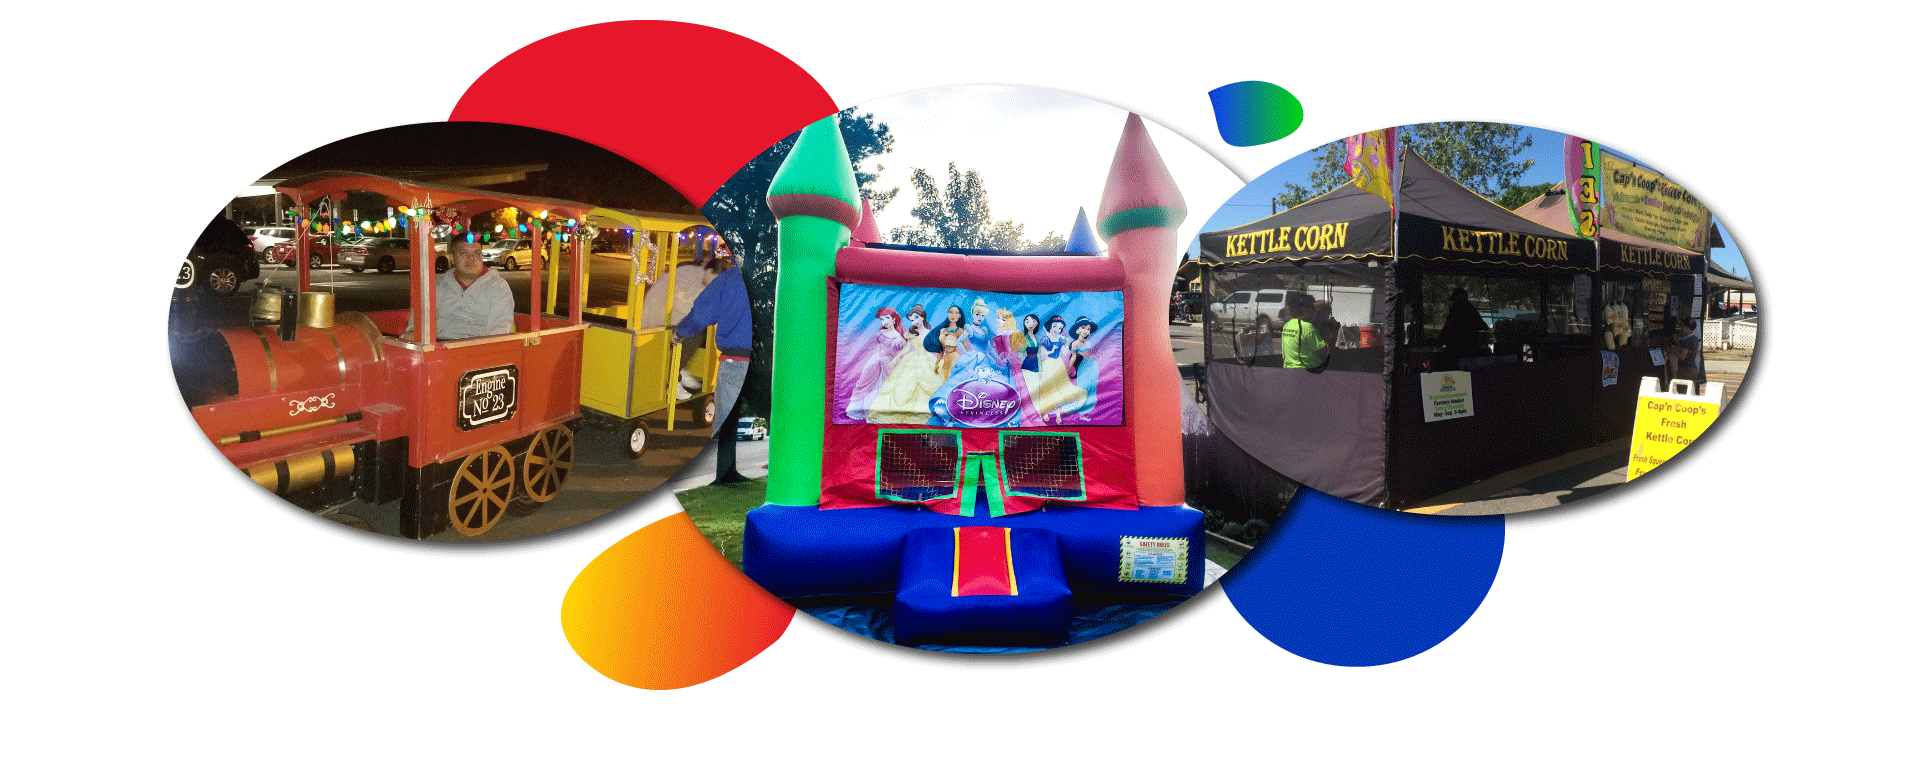 We offer bounce house, trains, and kettle corn for special events